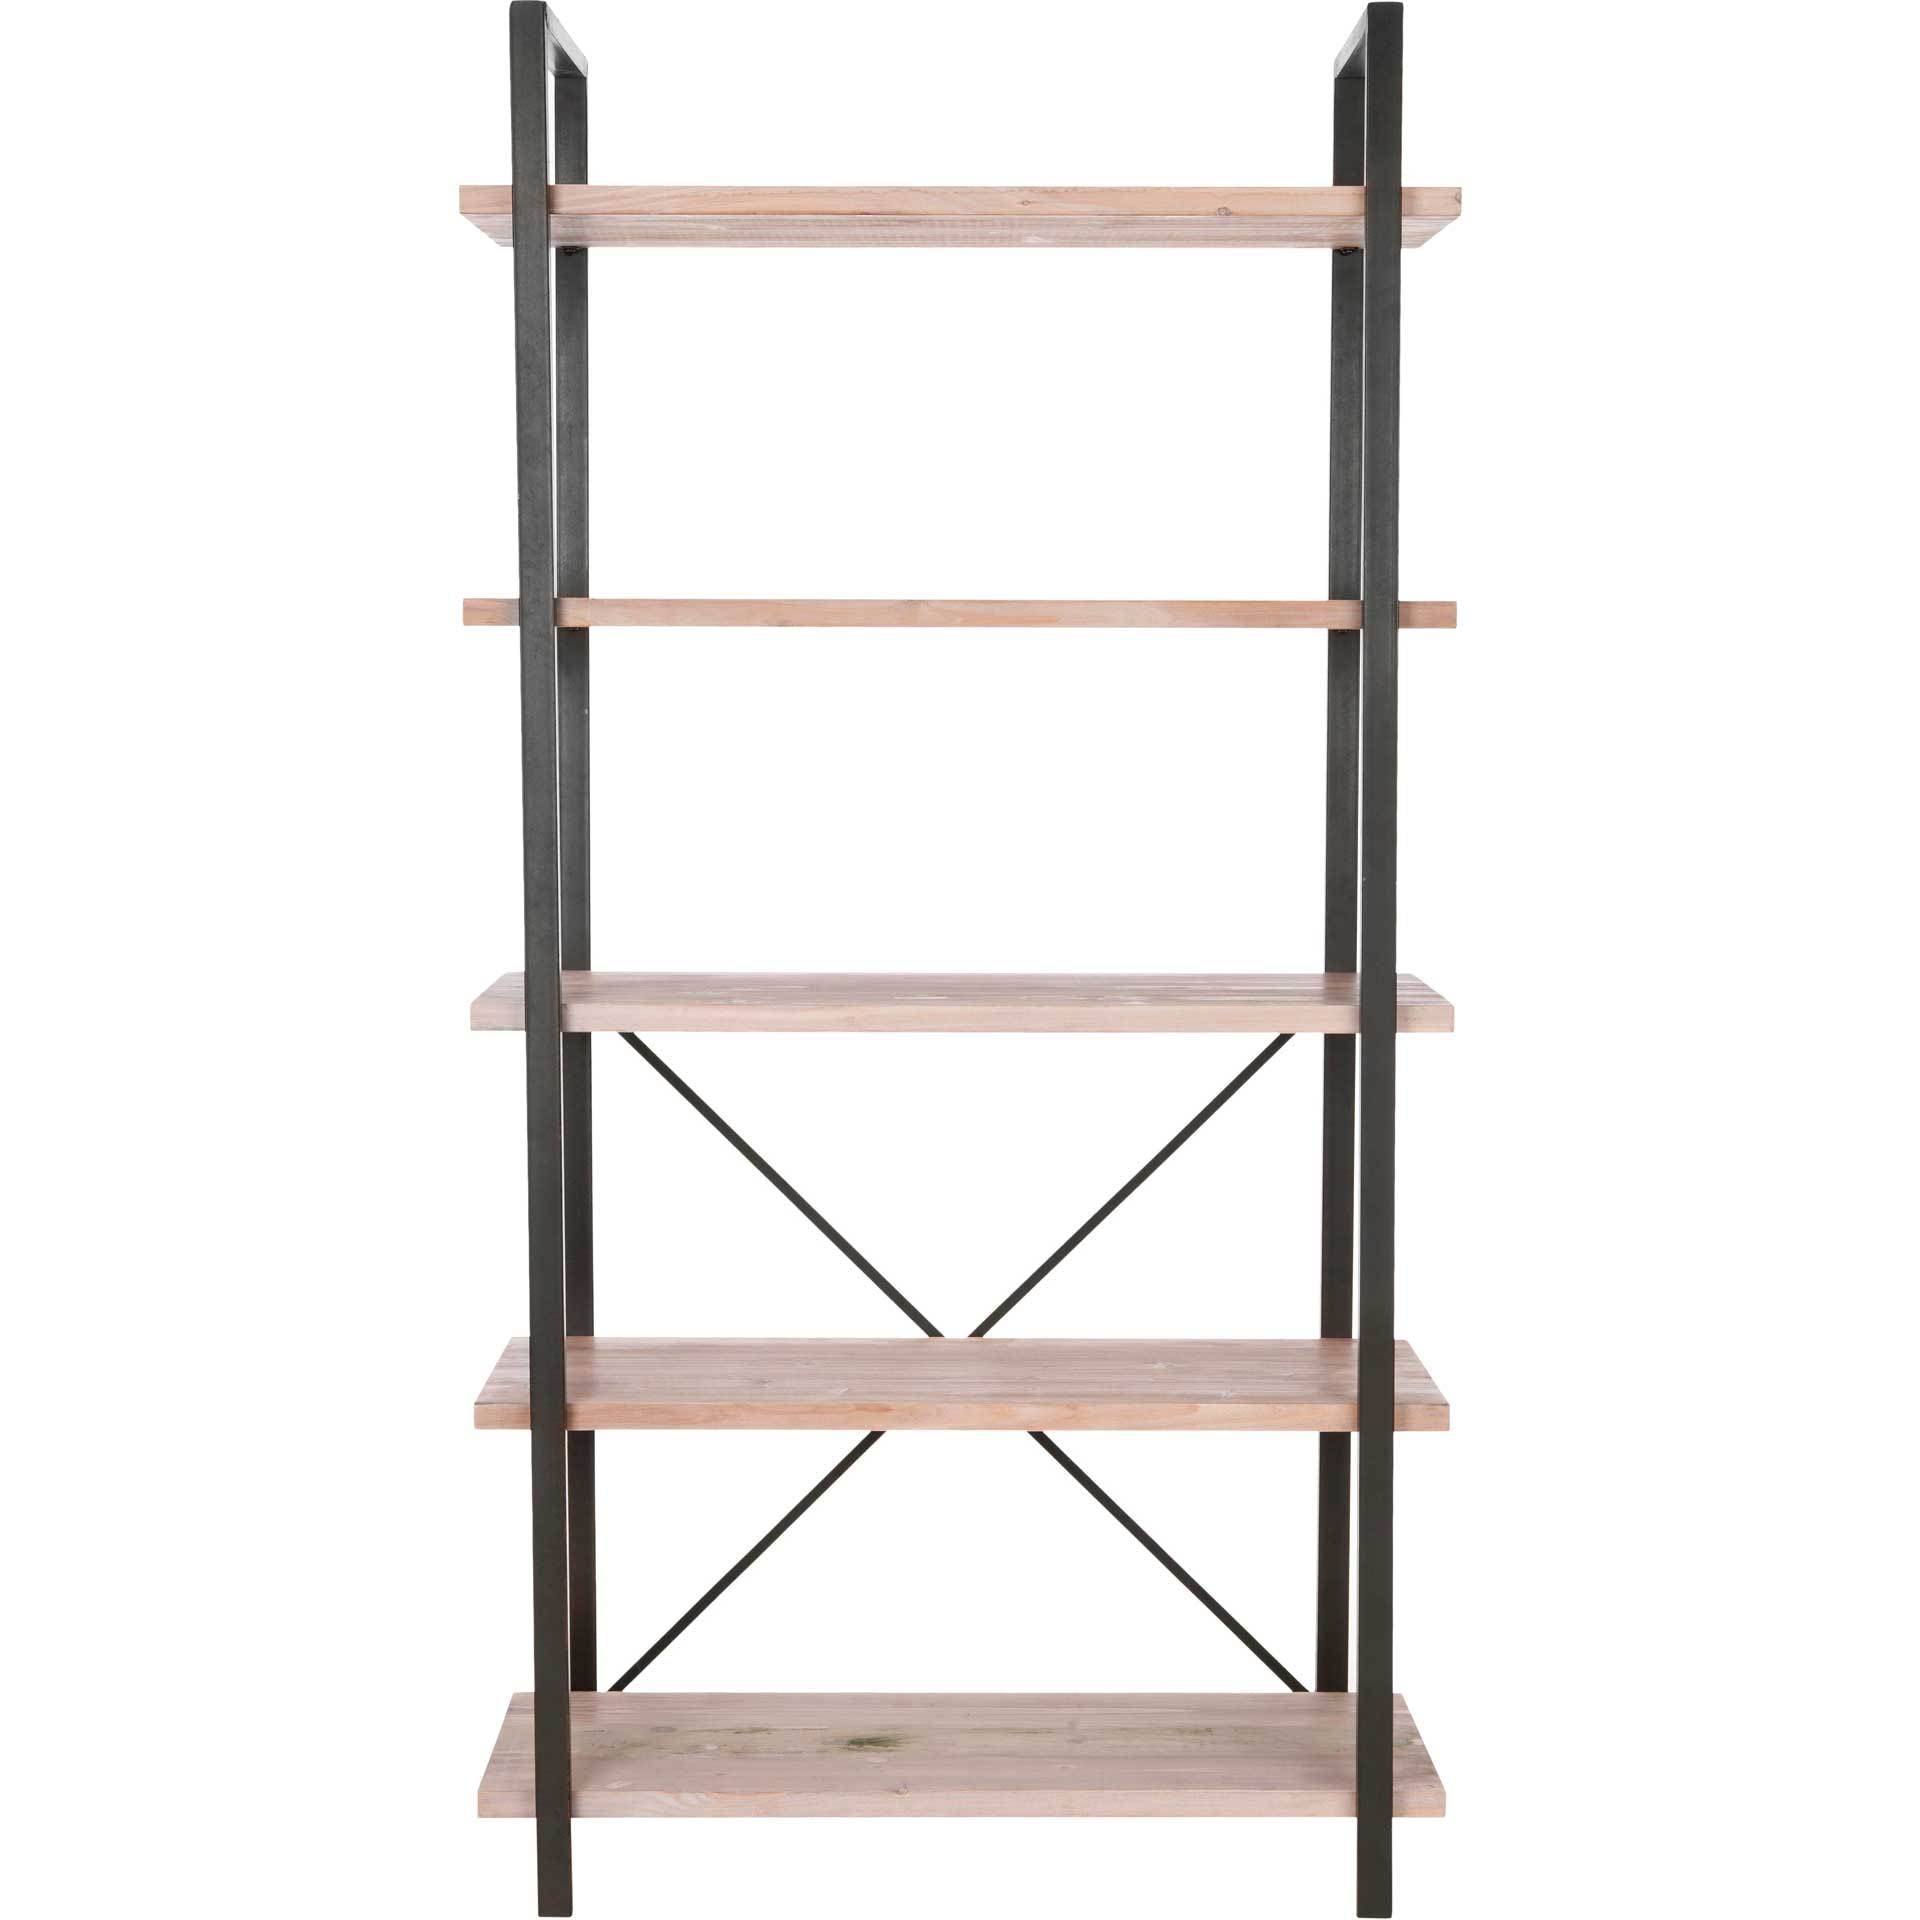 Chanel 5 Tier Etagere Red Maple